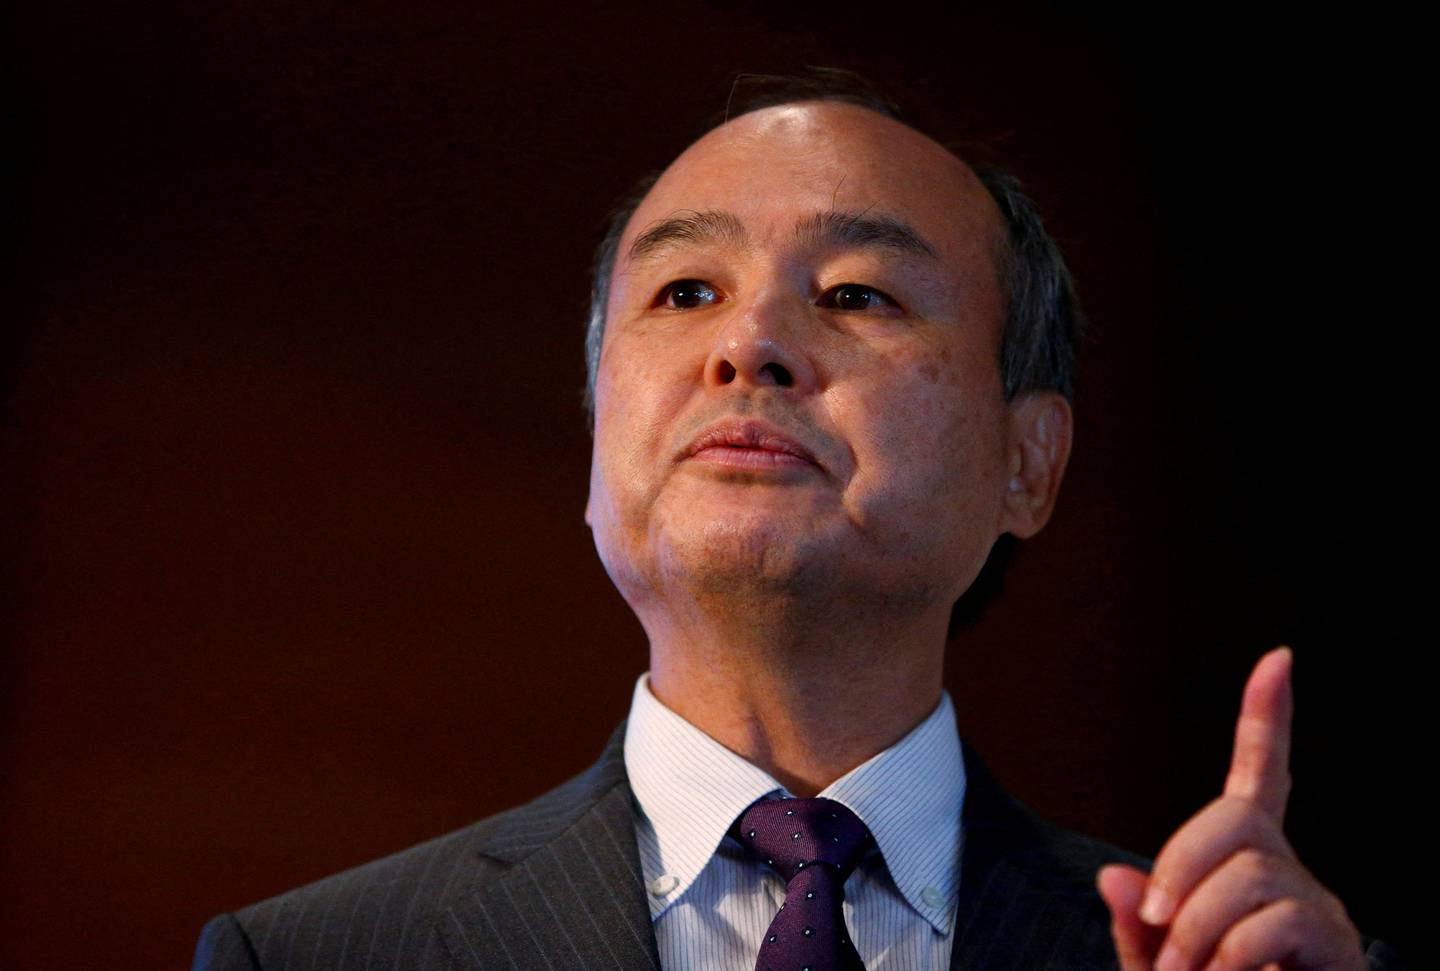 With concerns raised over SoftBank's financial stability, Masayoshi Son pledged to slash operating costs and lower the headcount. Reuters